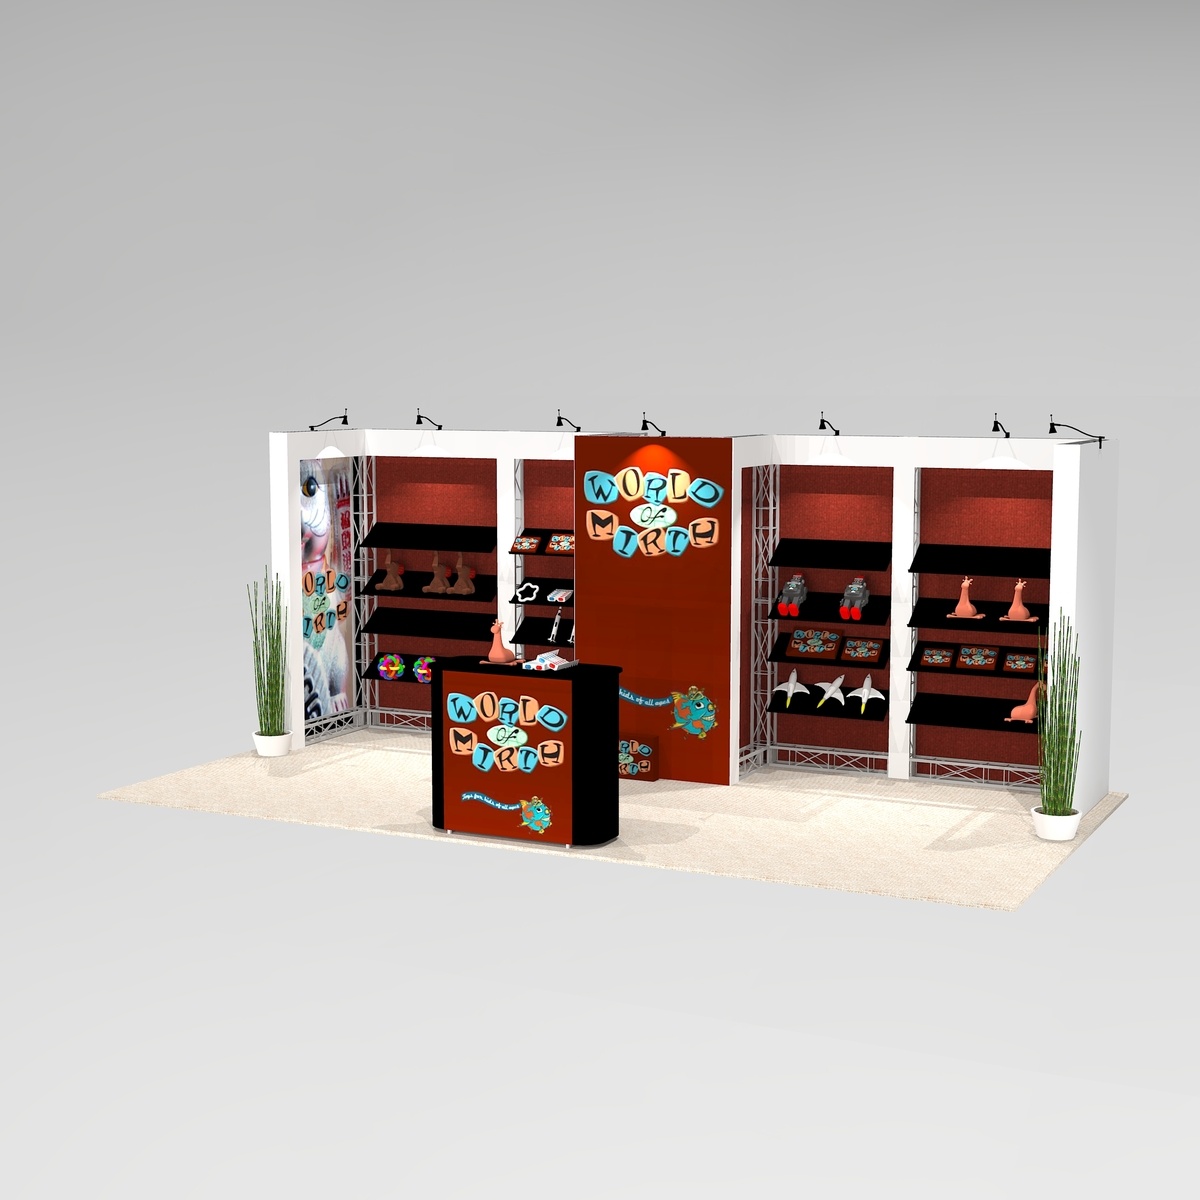 Recessed shelving trade show exhibit design MONT1020 Graphic Package B